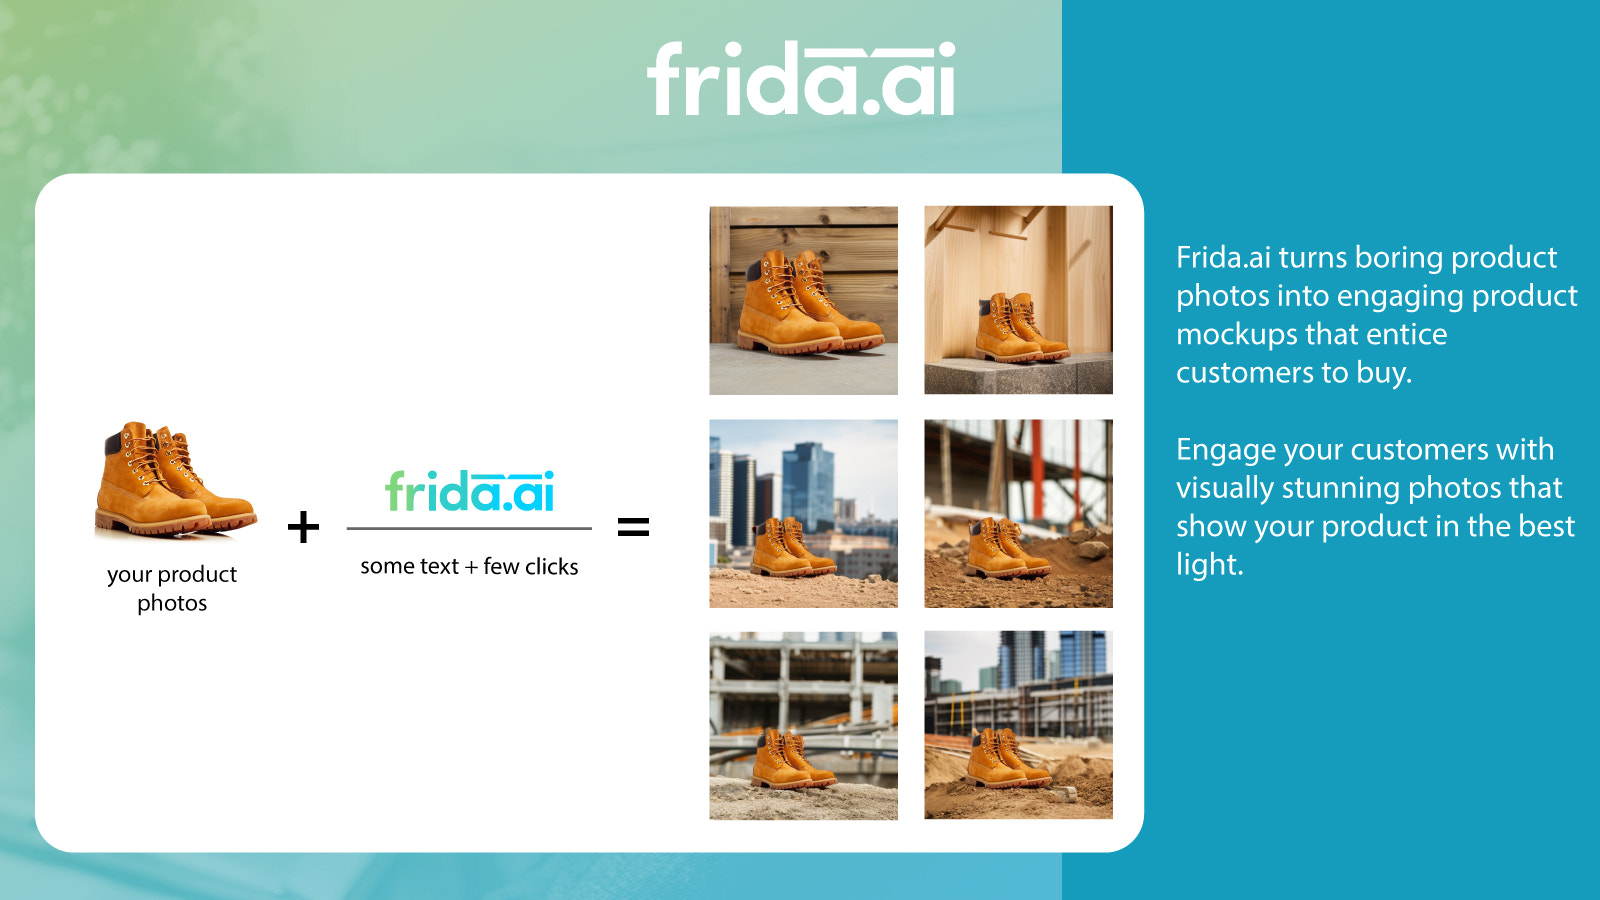 Use descriptive prompt to generate product photos.